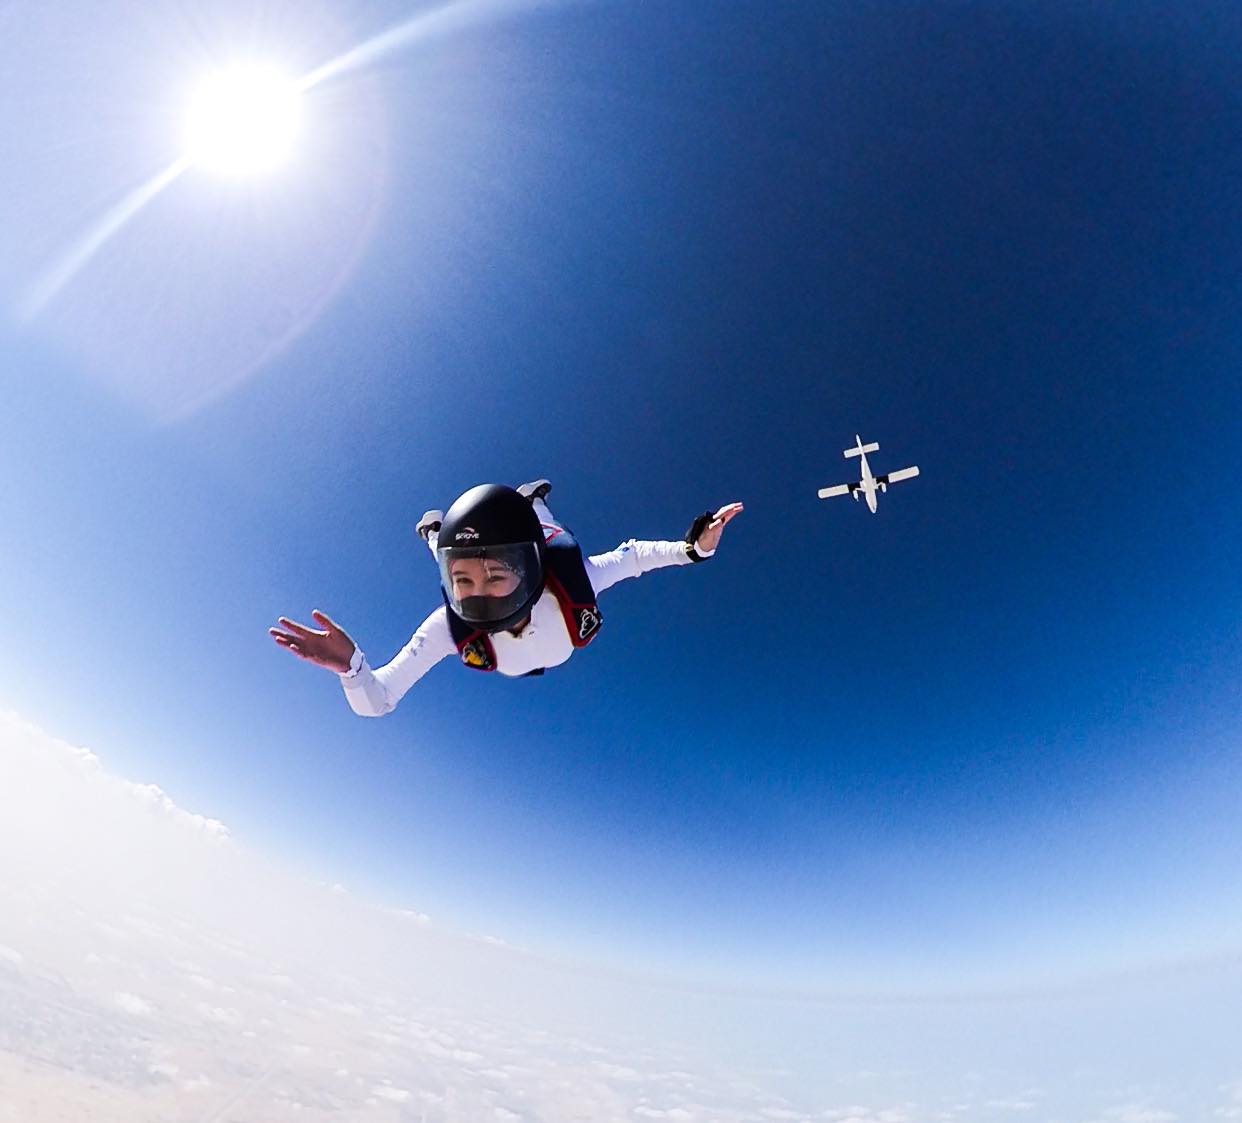 Justine Suva Alfonso makes a wave at the camera in an exhilarating skydive in Abu Dhabi